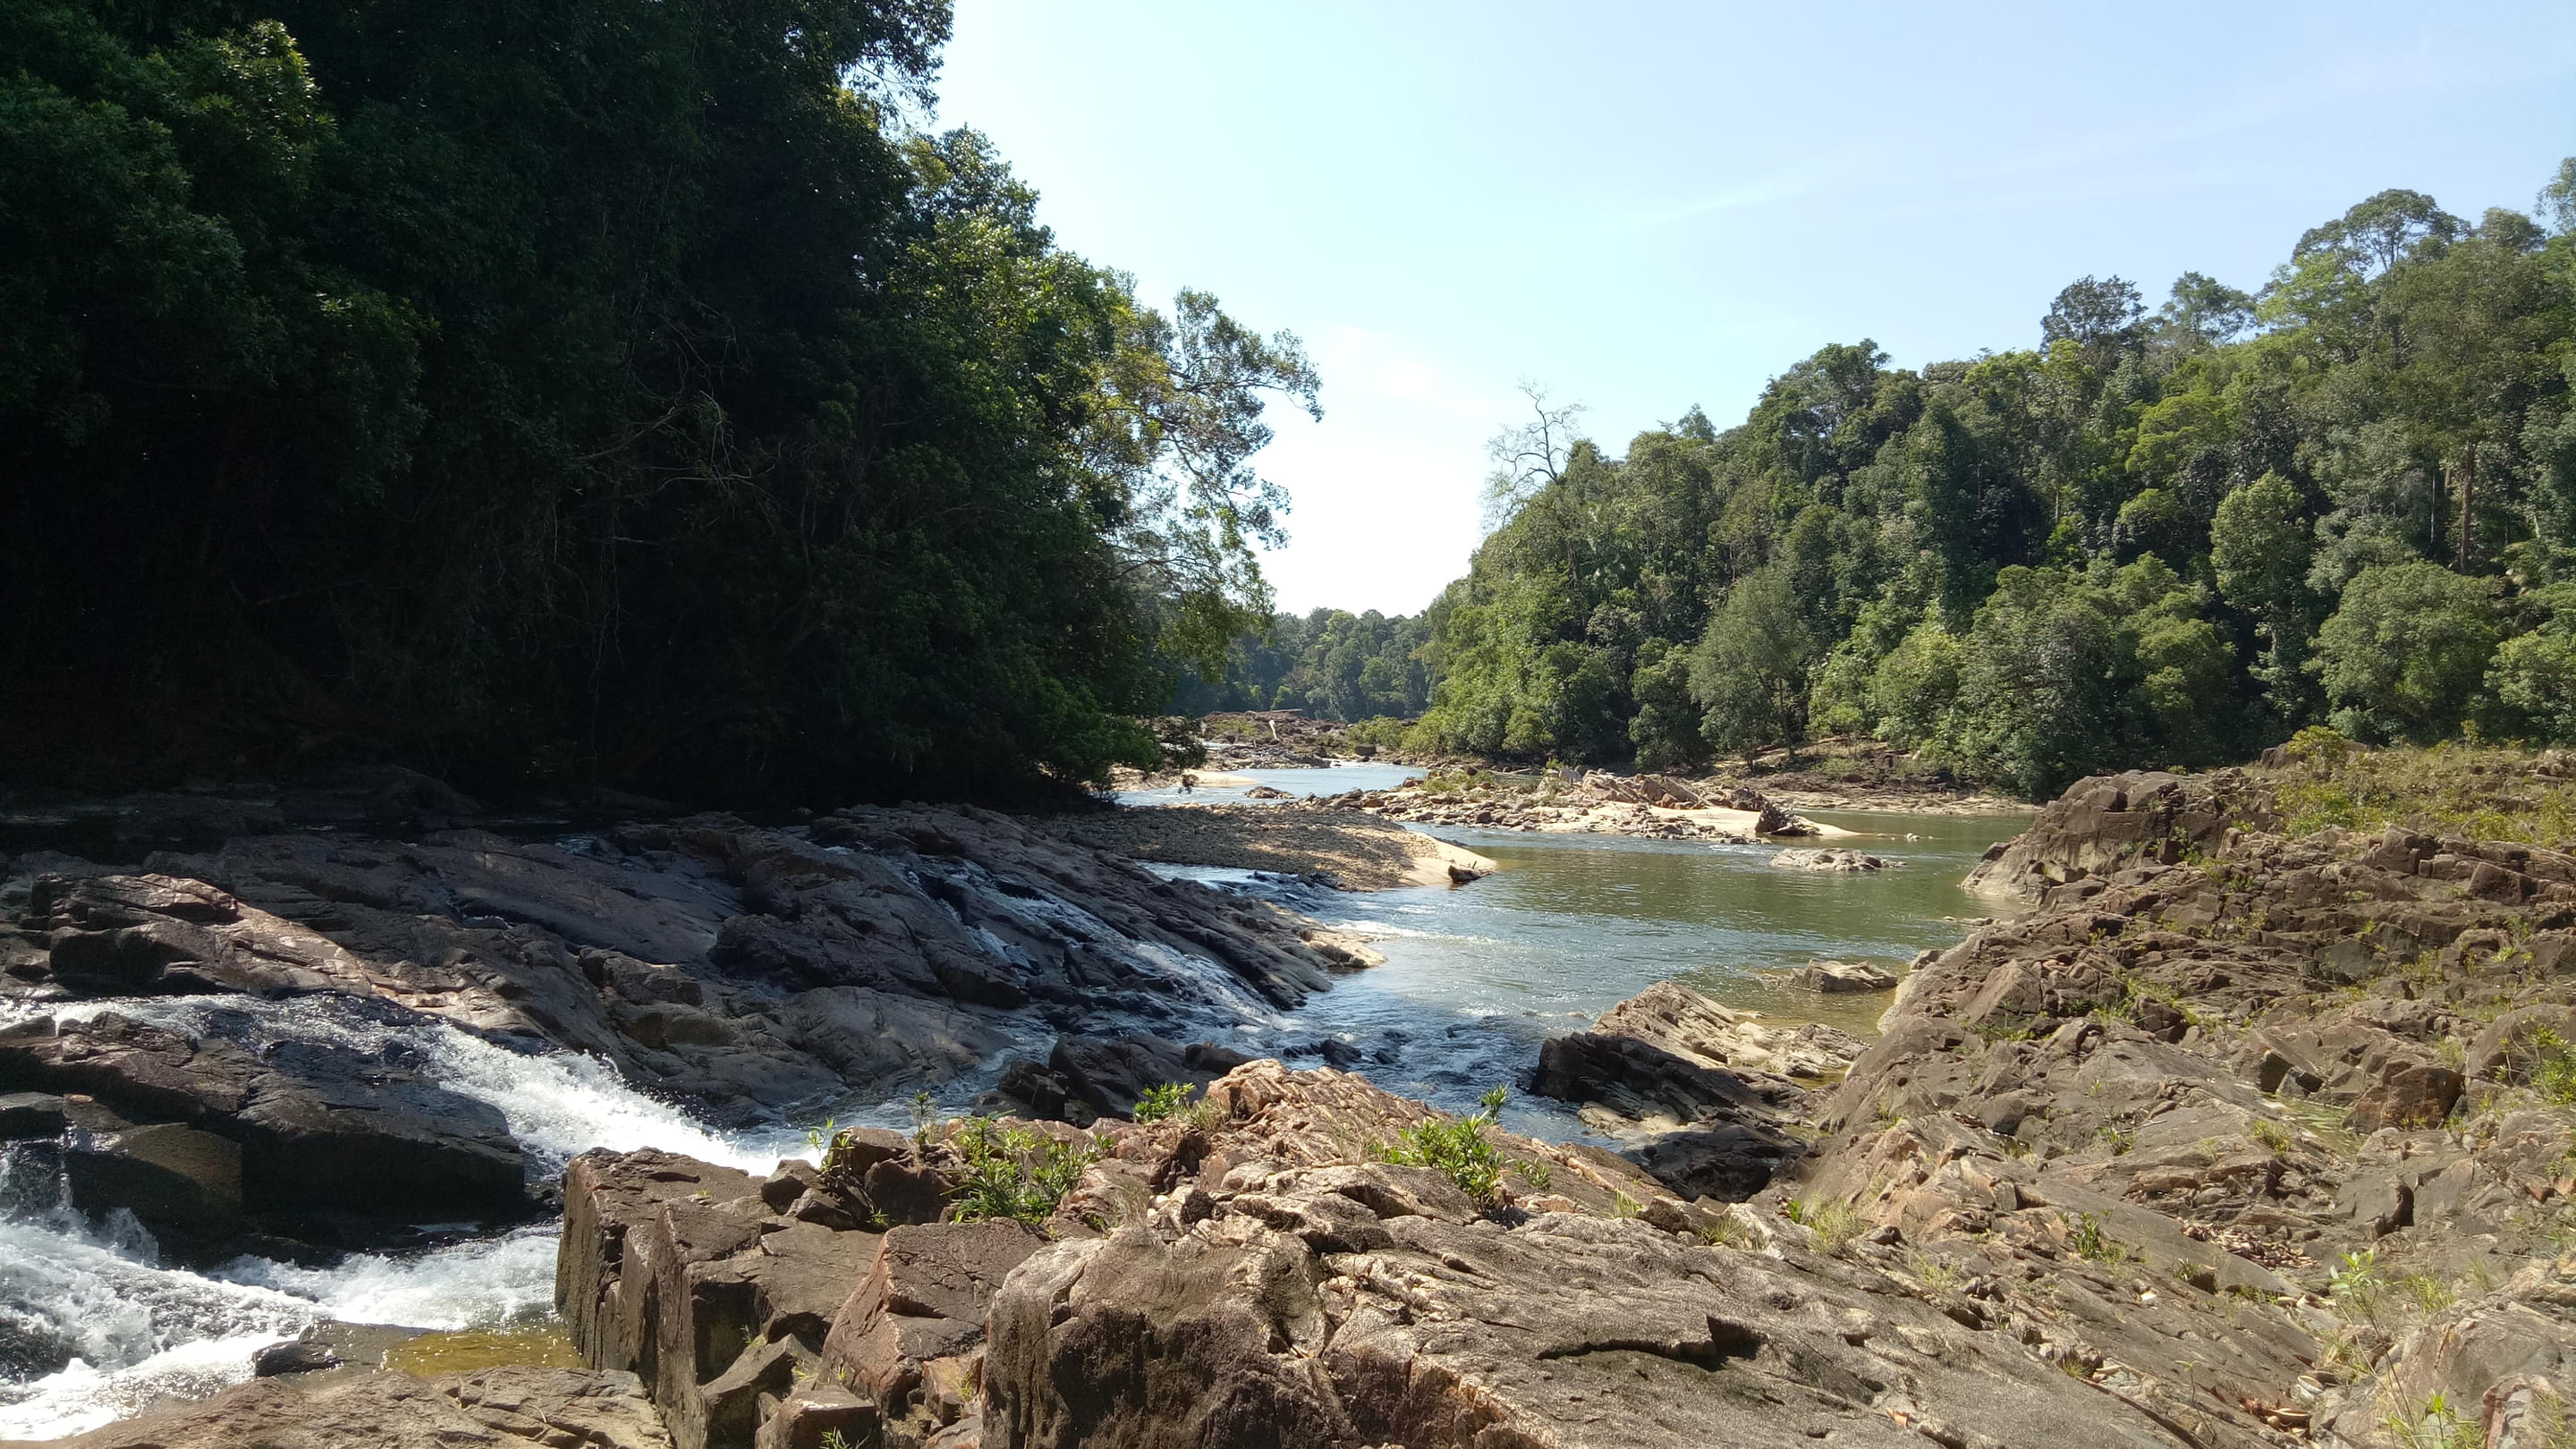 Endau Rompin National Park Overview